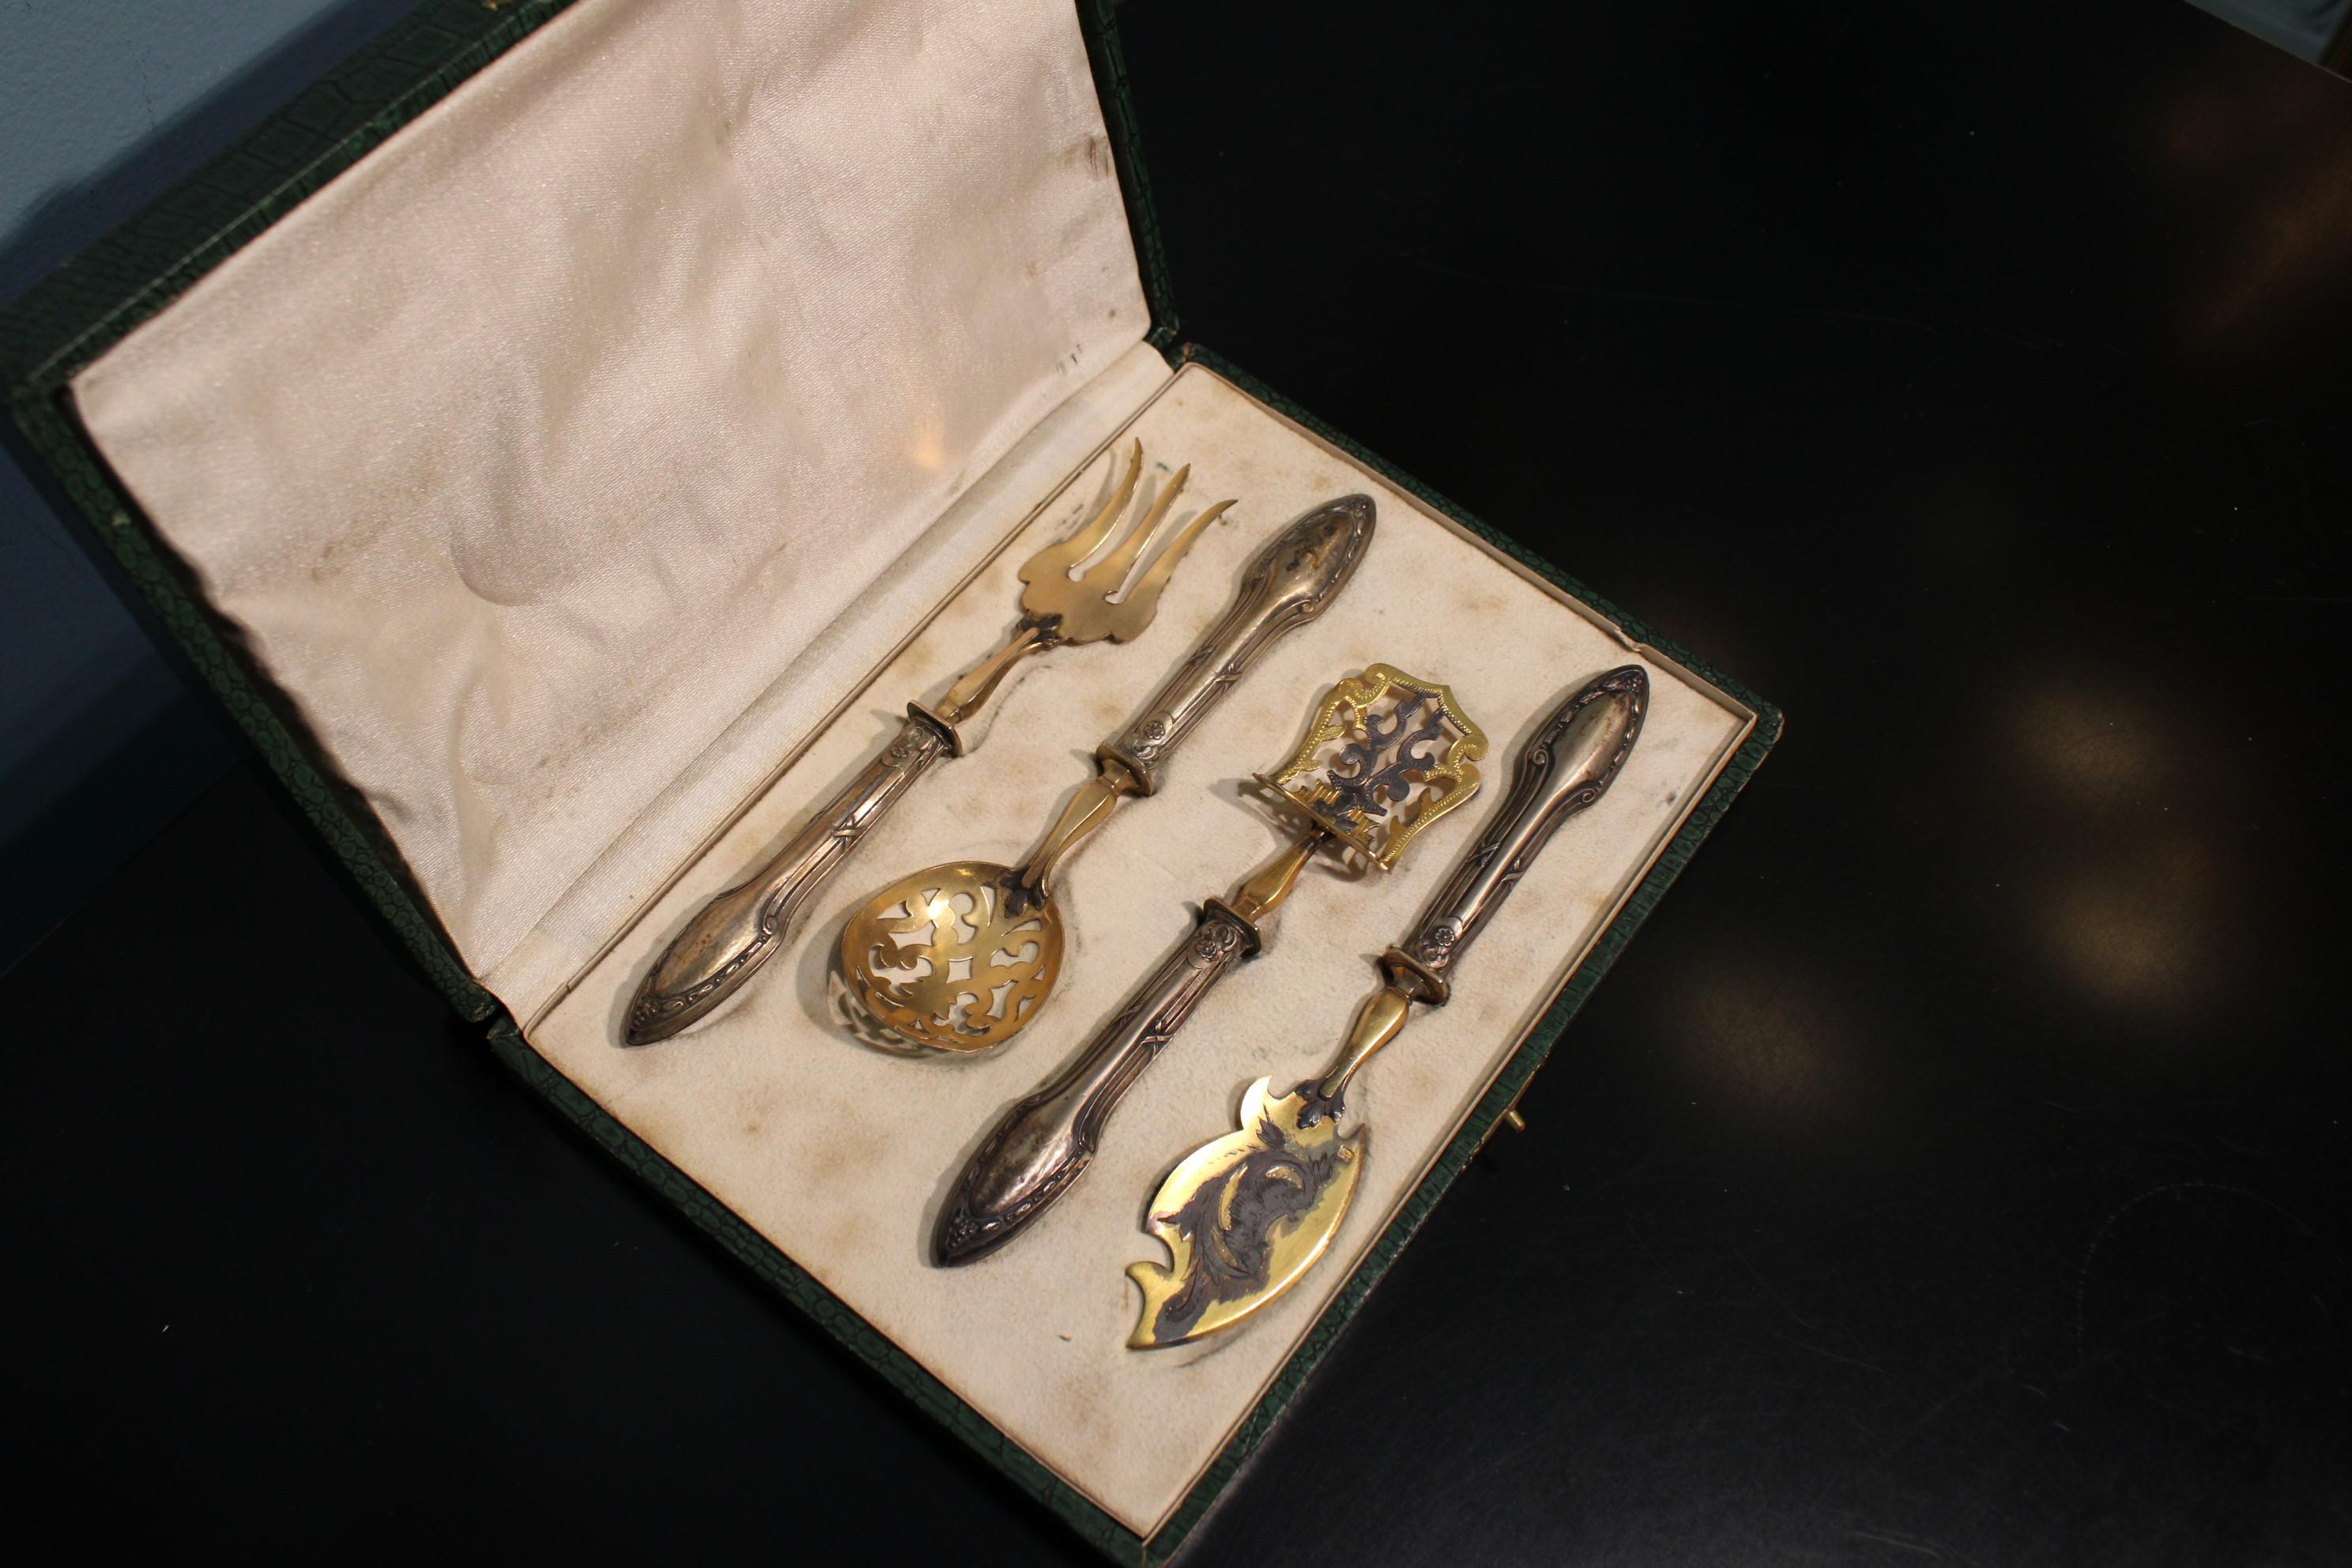 Set of 4 filled silver and gold metal cutlery, in a box.

Box dimensions : 22.5 x 16.5 x 4 cm
Cutlery dimensions : 18 x 3 x 1 cm.